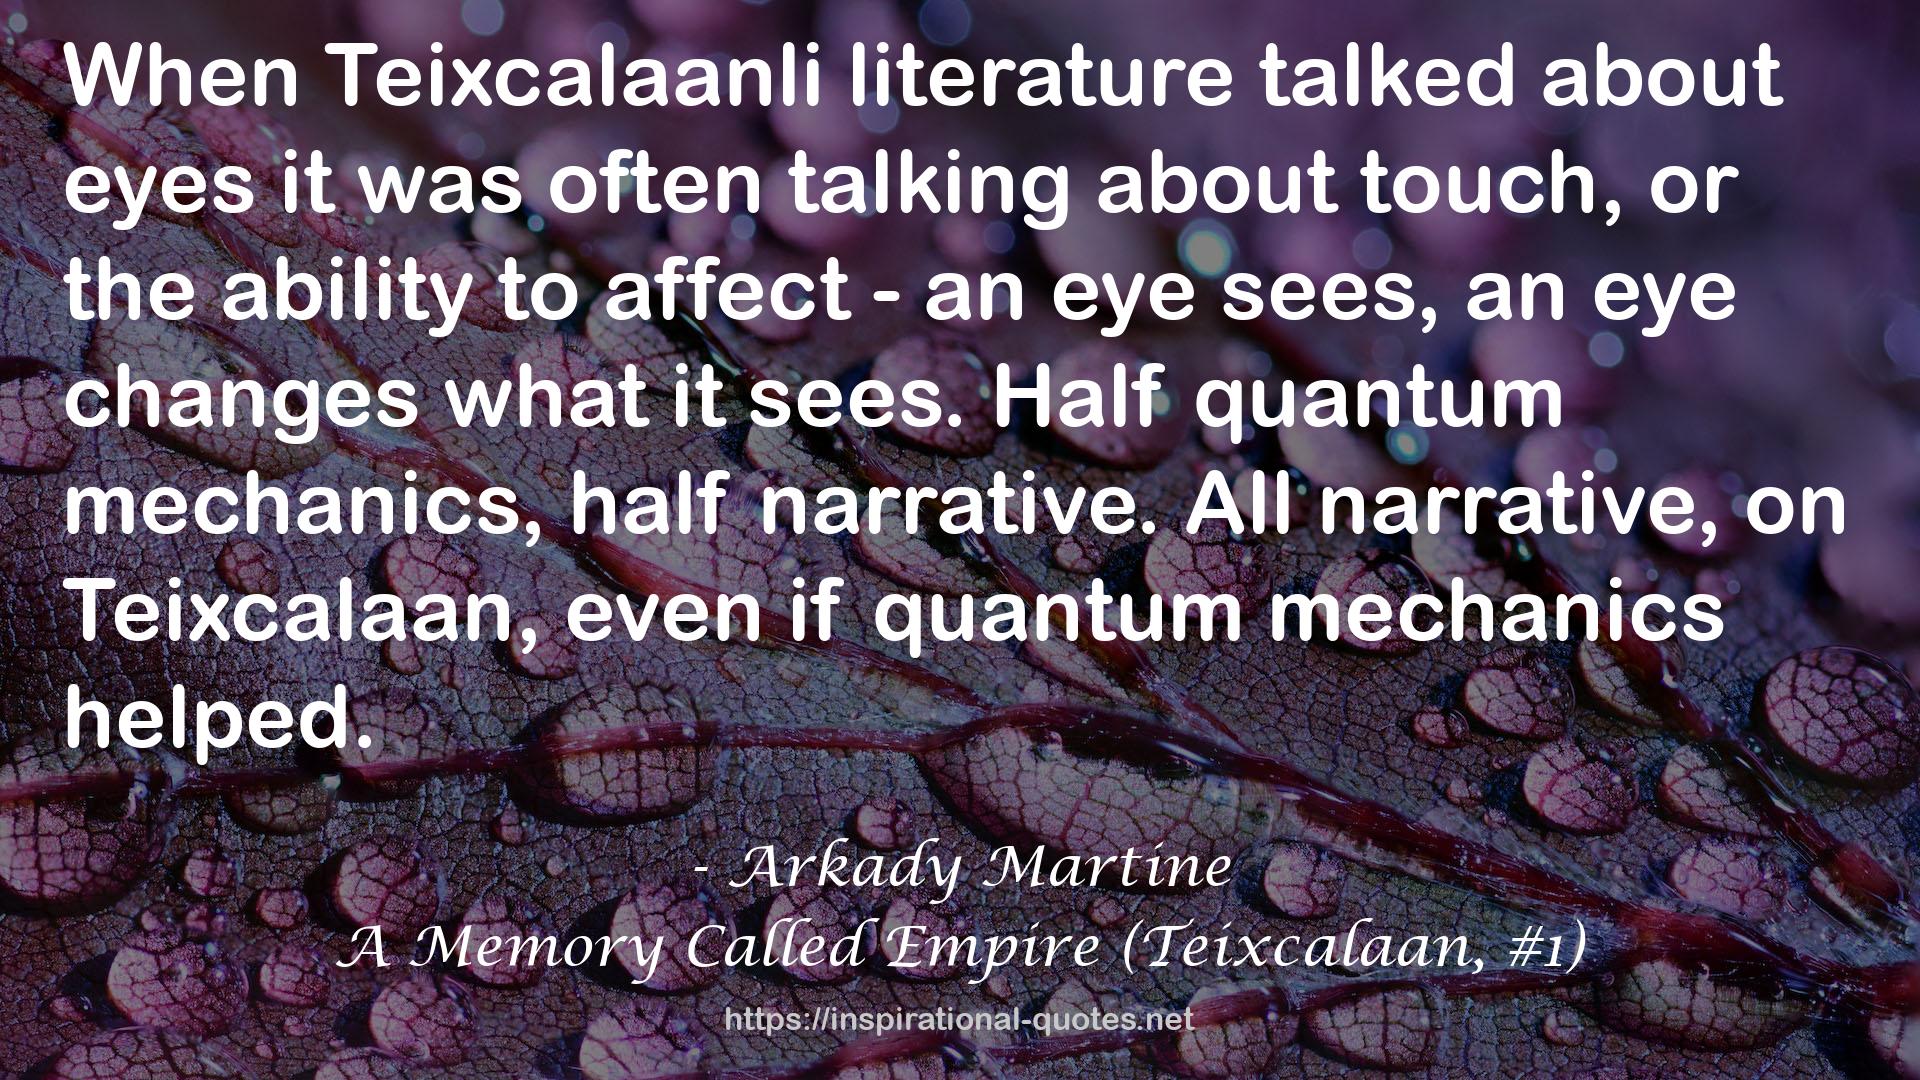 A Memory Called Empire (Teixcalaan, #1) QUOTES